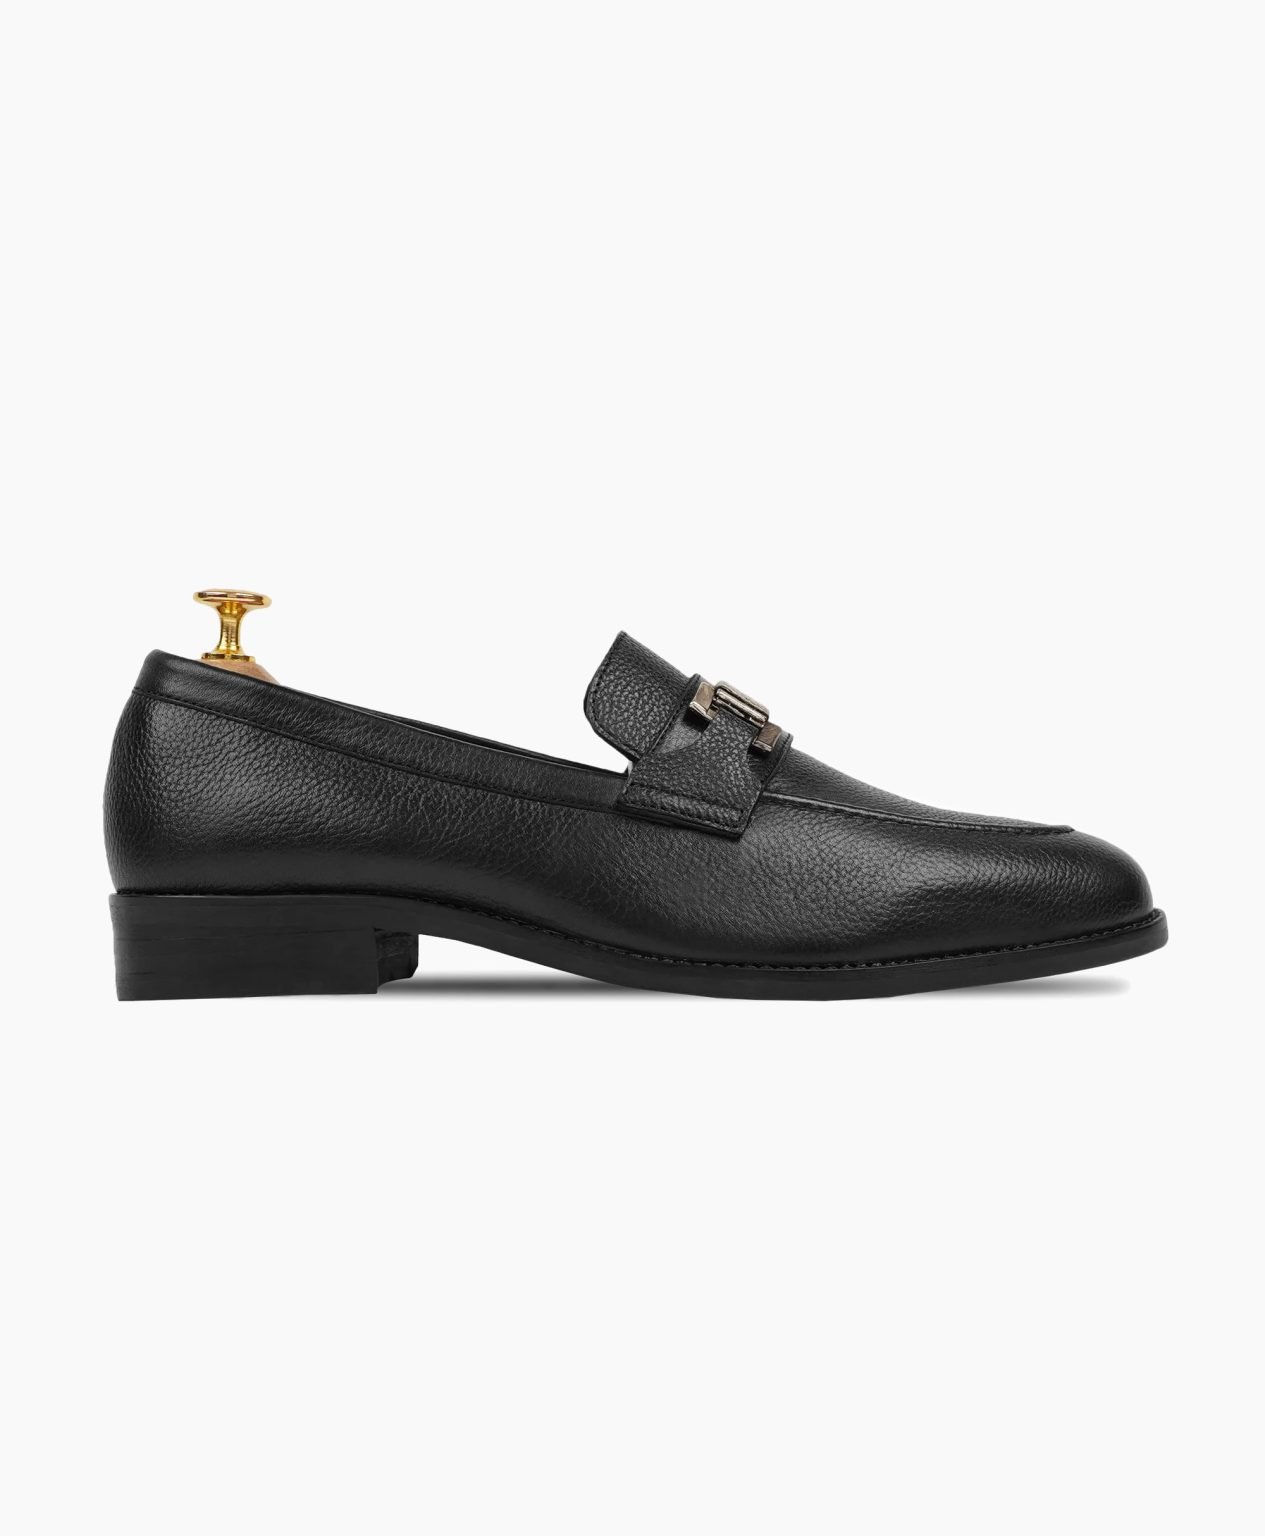 exeter-black-leather-loafers-image201